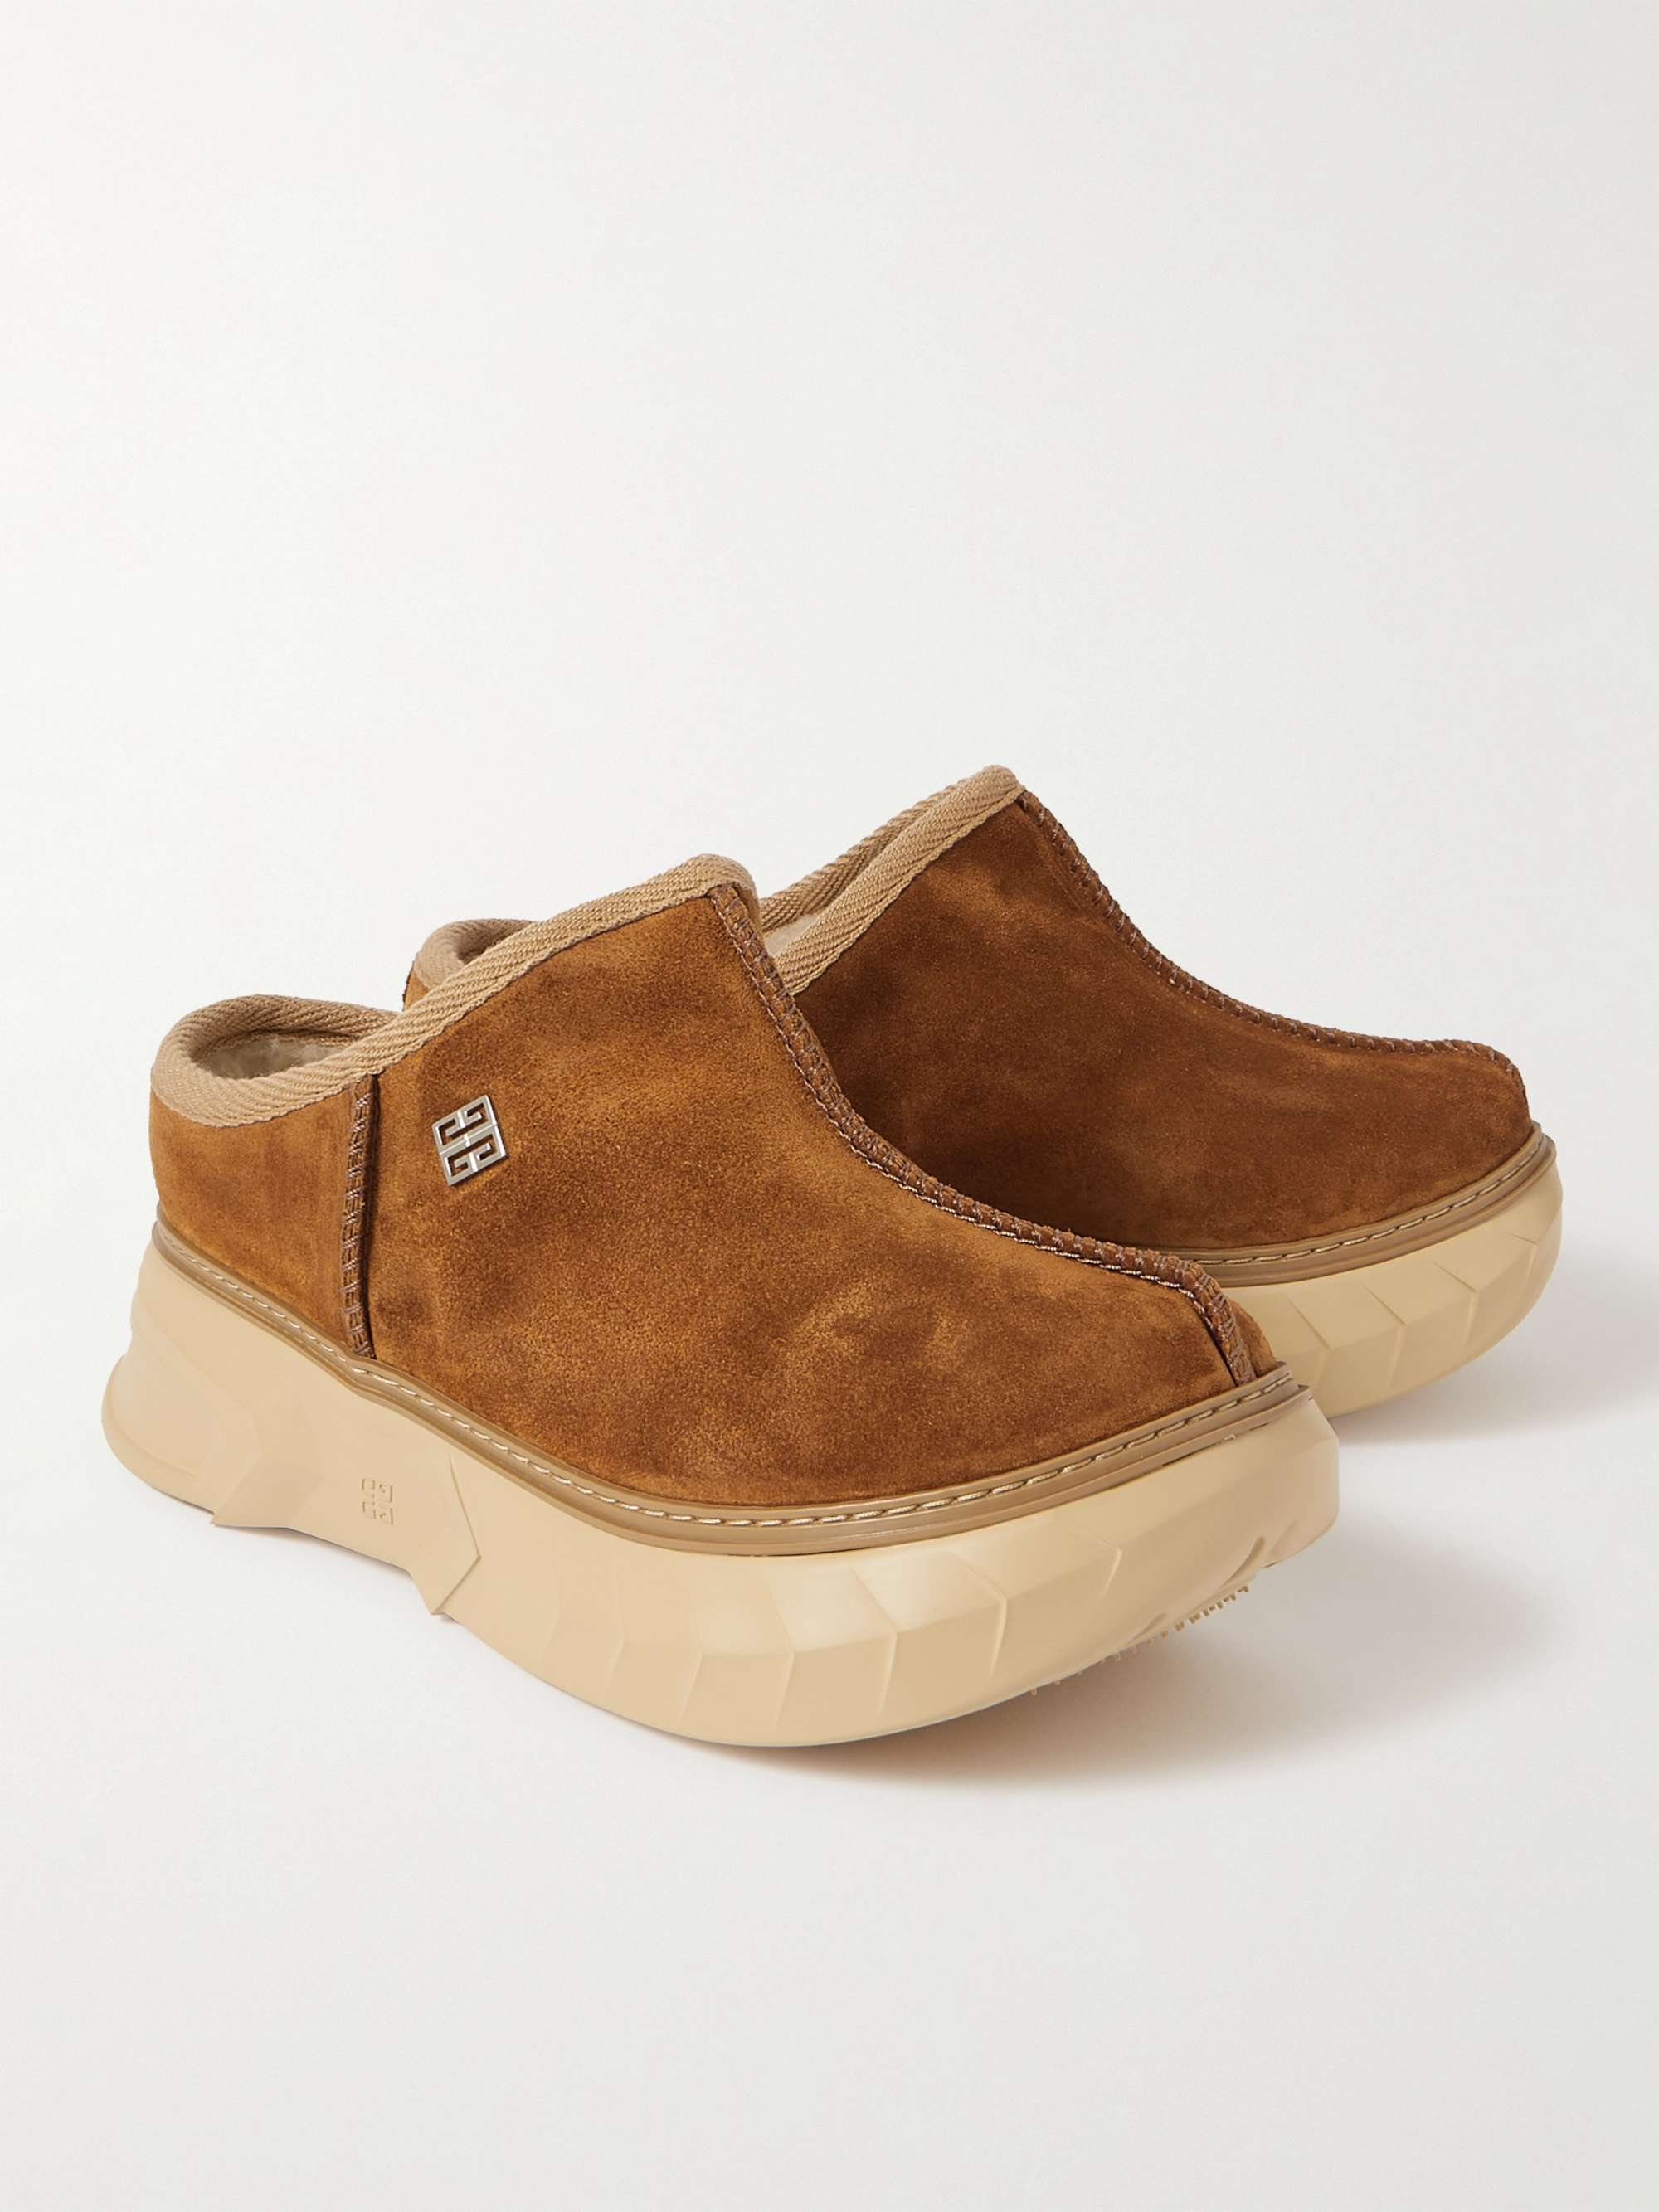 GIVENCHY Winter Mallow Faux Shearling-Lined Suede Mules